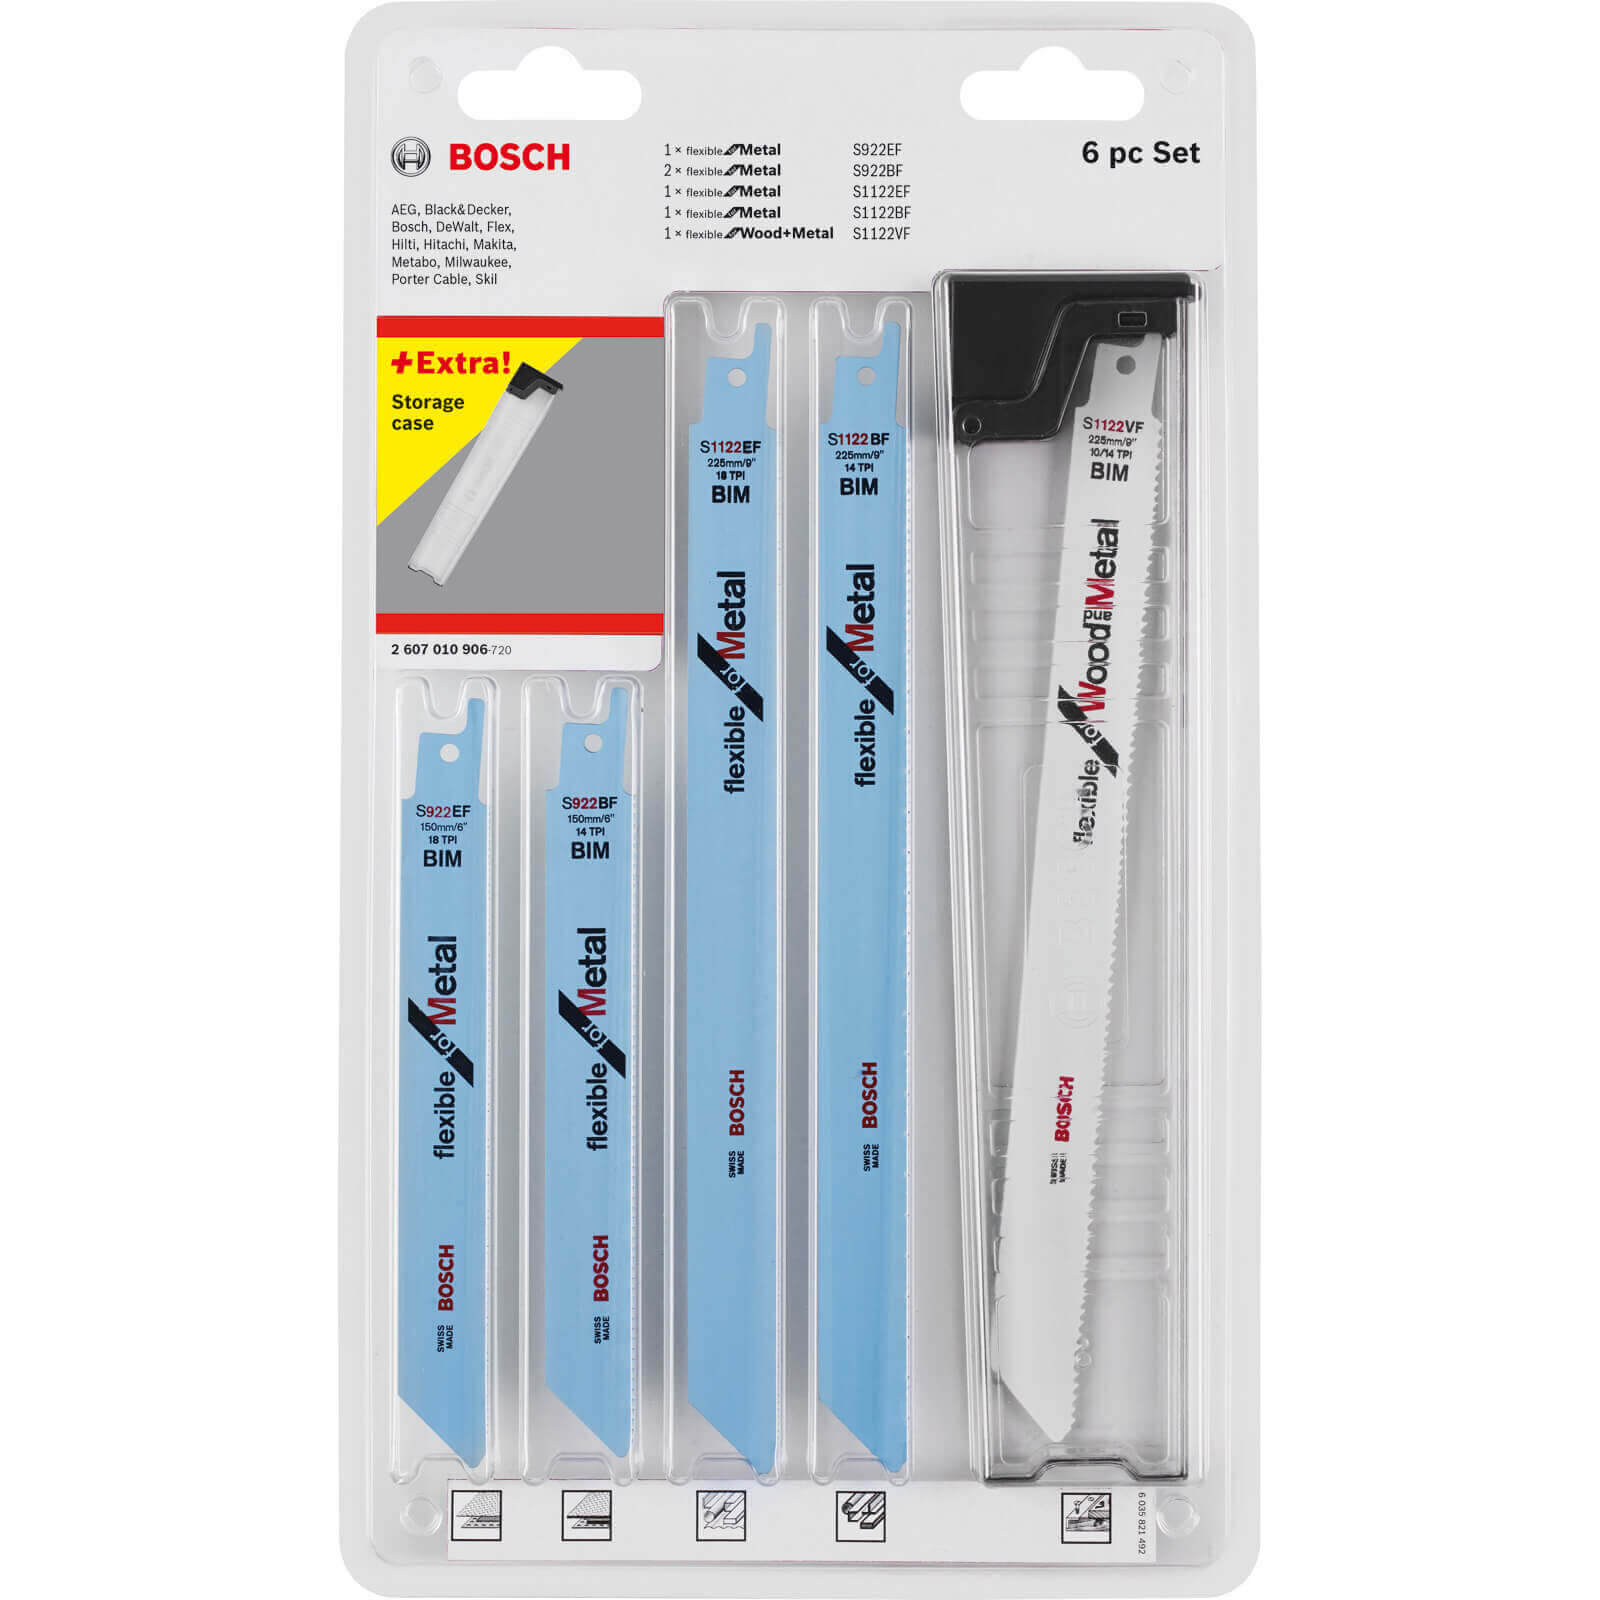 Image of Bosch 6 Piece Wood and Metal Cutting Reciprocating Sabre Saw Blade Set